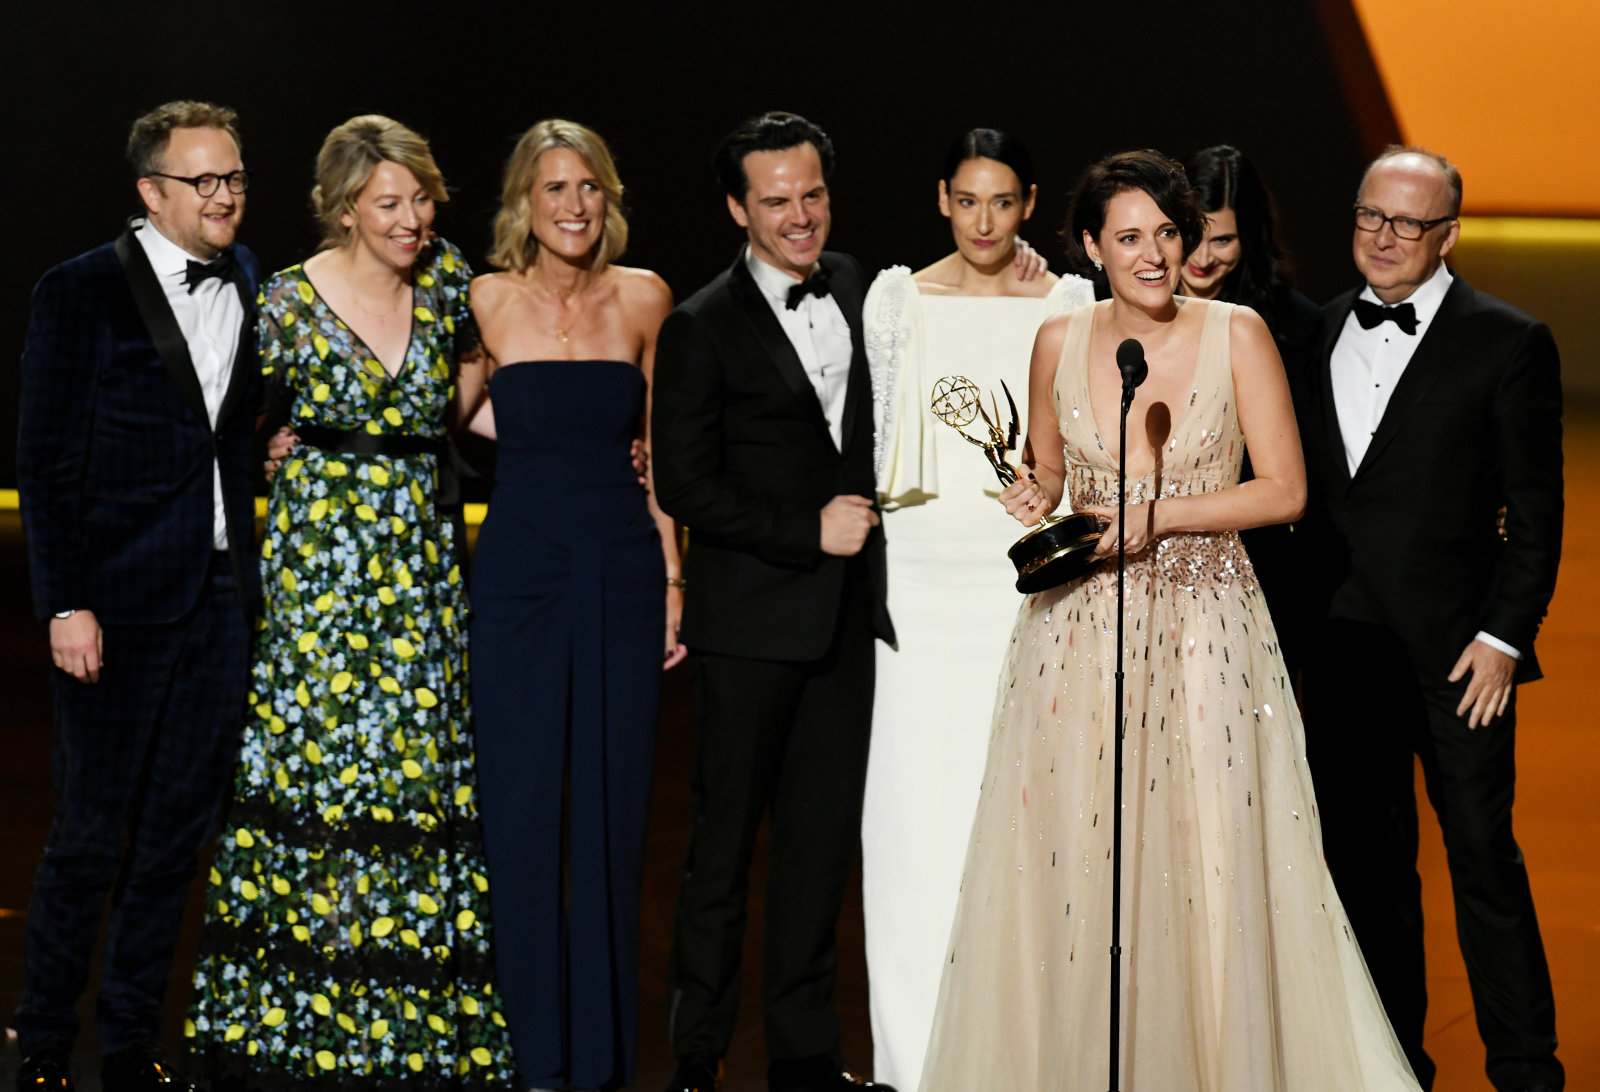 Phoebe Waller-Bridge (speaking) and fellow cast and crew members of 'Fleabag' accept the Outstanding Comedy Series award onstage during the 71st Emmy Awards at Microsoft Theater